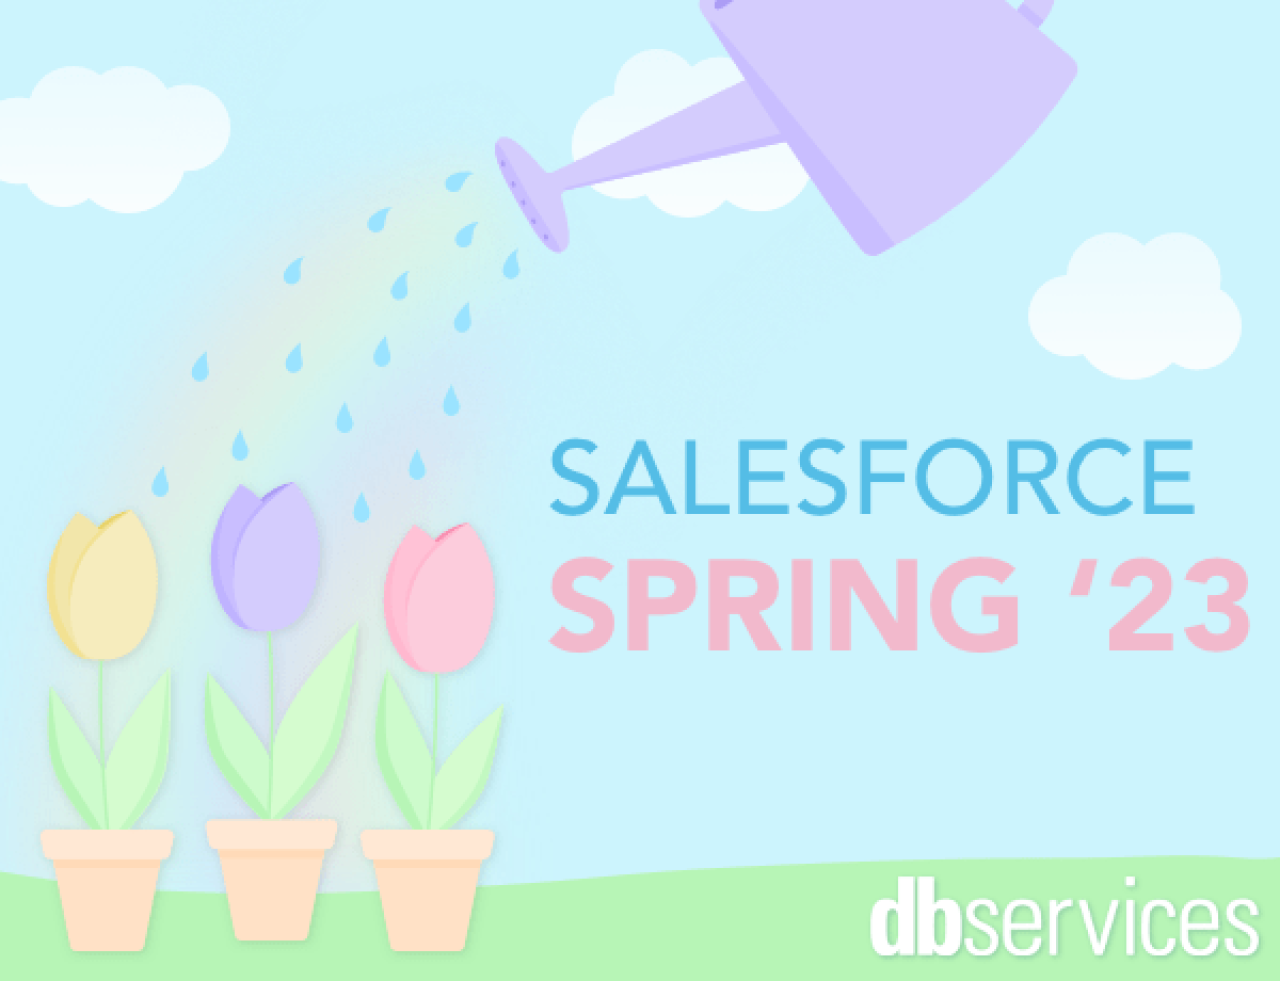 salesforce spring 23 release notes db services.